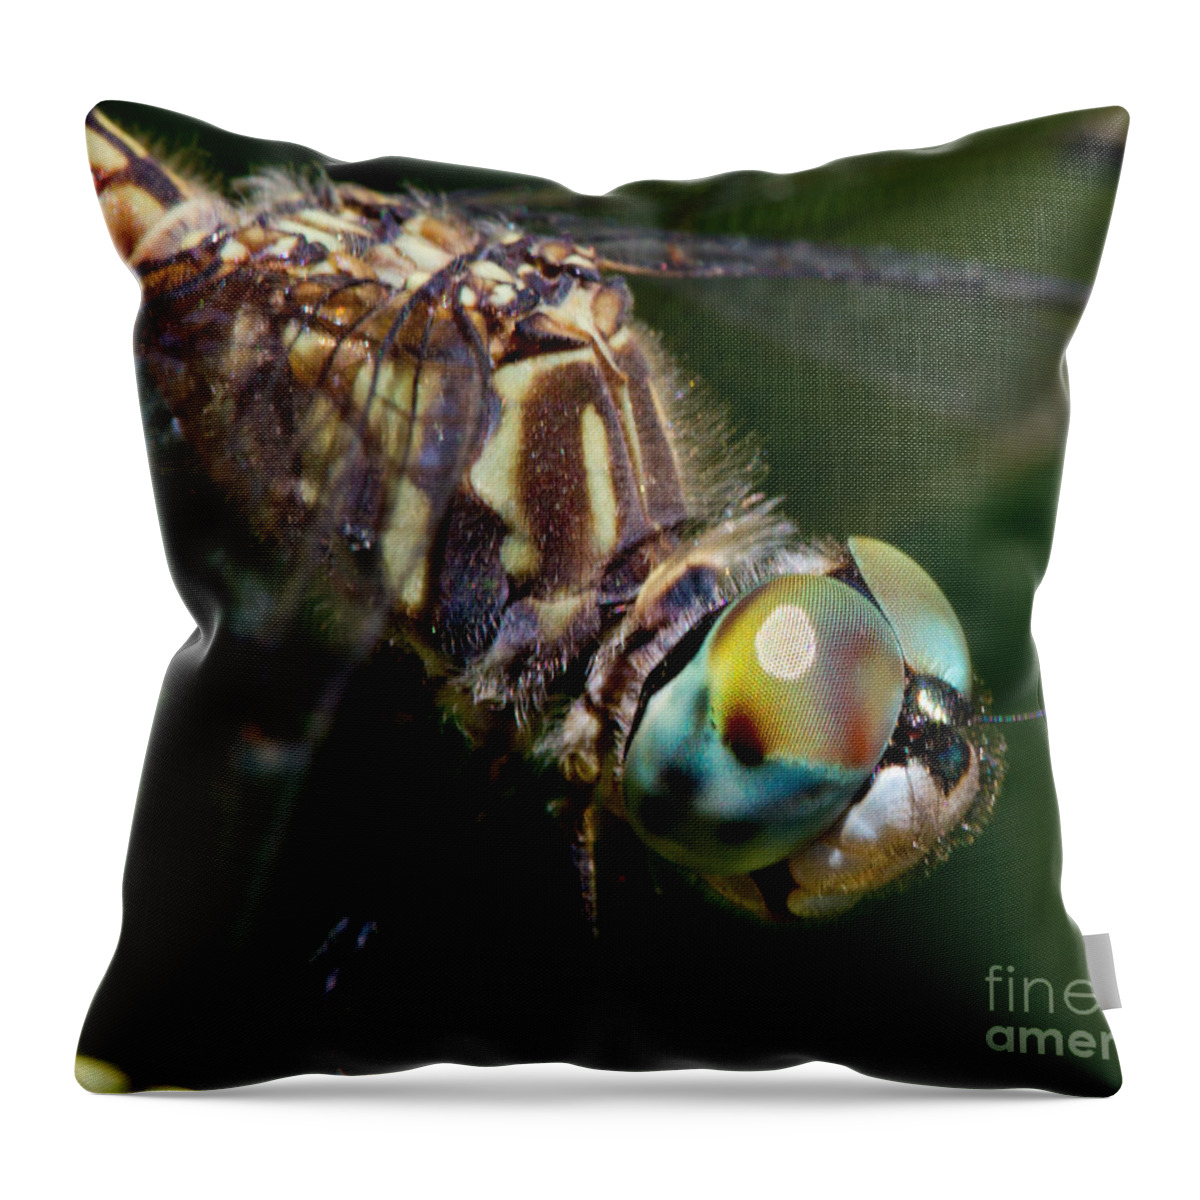 Insect Throw Pillow featuring the photograph Dragons Breath by Robert Woodward